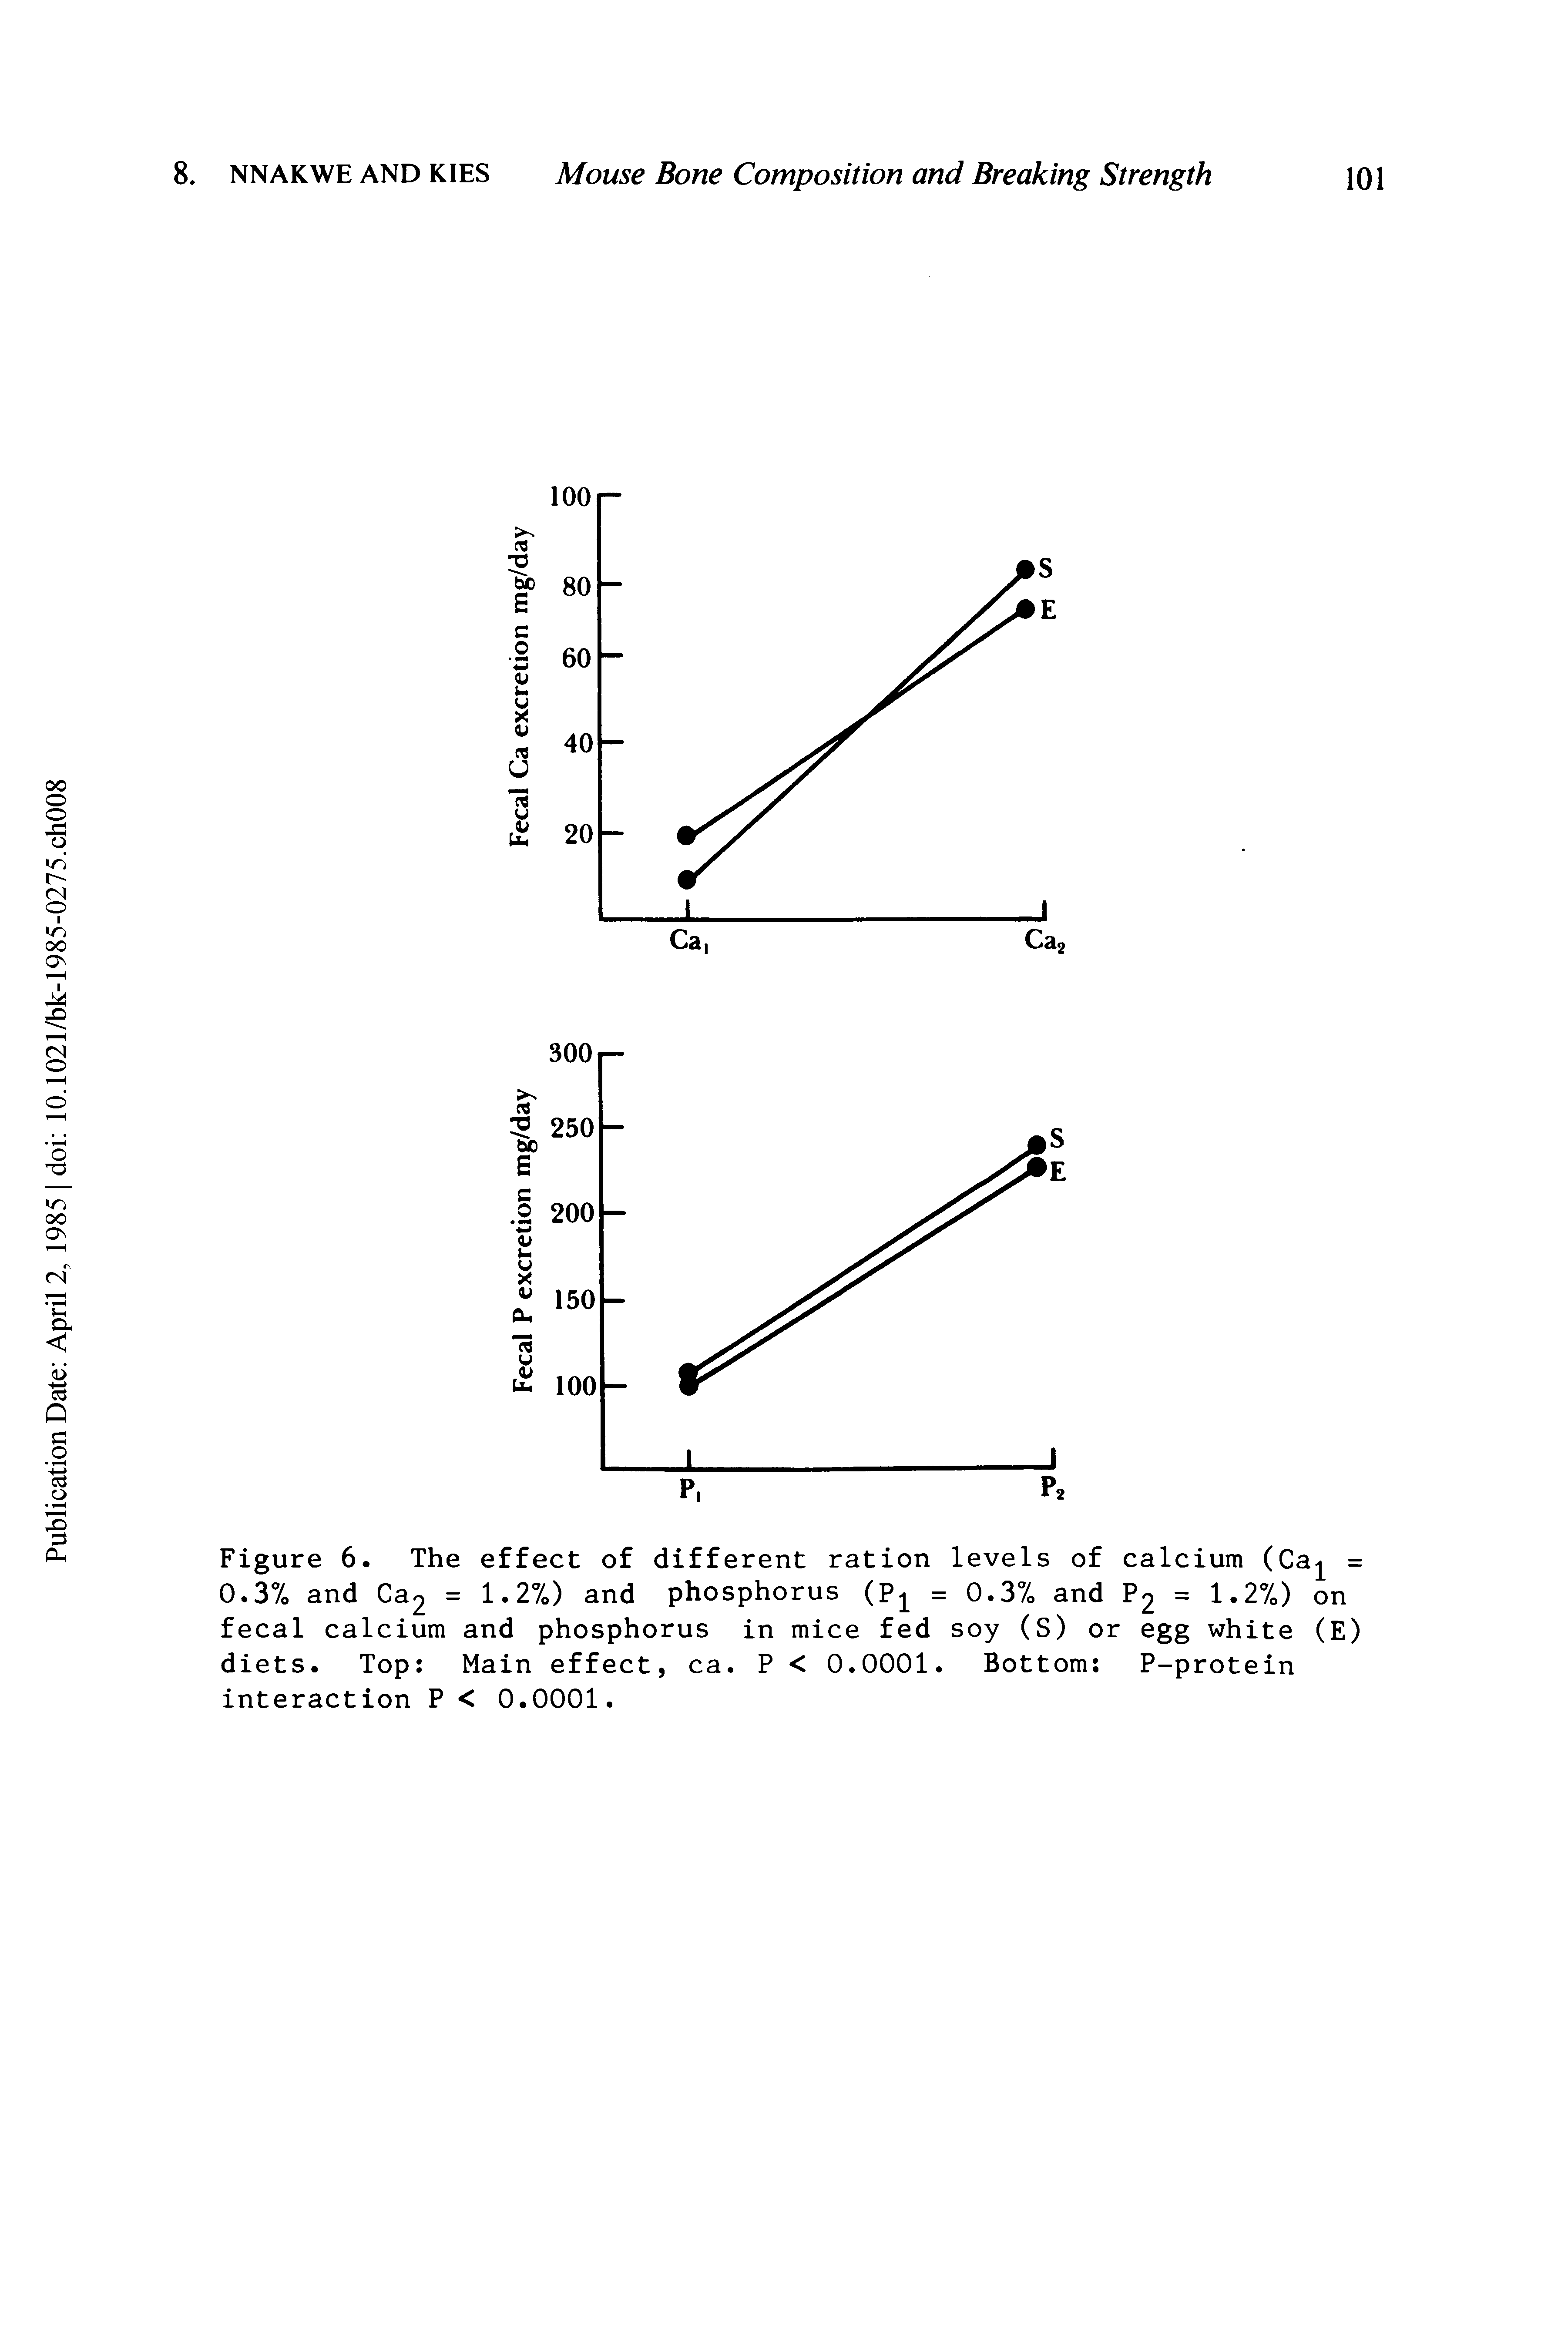 Figure 6. The effect of different ration levels of calcium (Ca = 0.3% and Ca2 = 1.2%) and phosphorus (P1 = 0.3% and P2 = 1.2%) on fecal calcium and phosphorus in mice fed soy (S) or egg white (E) diets. Top Main effect, ca. P < 0.0001. Bottom P-protein interaction P < 0.0001.